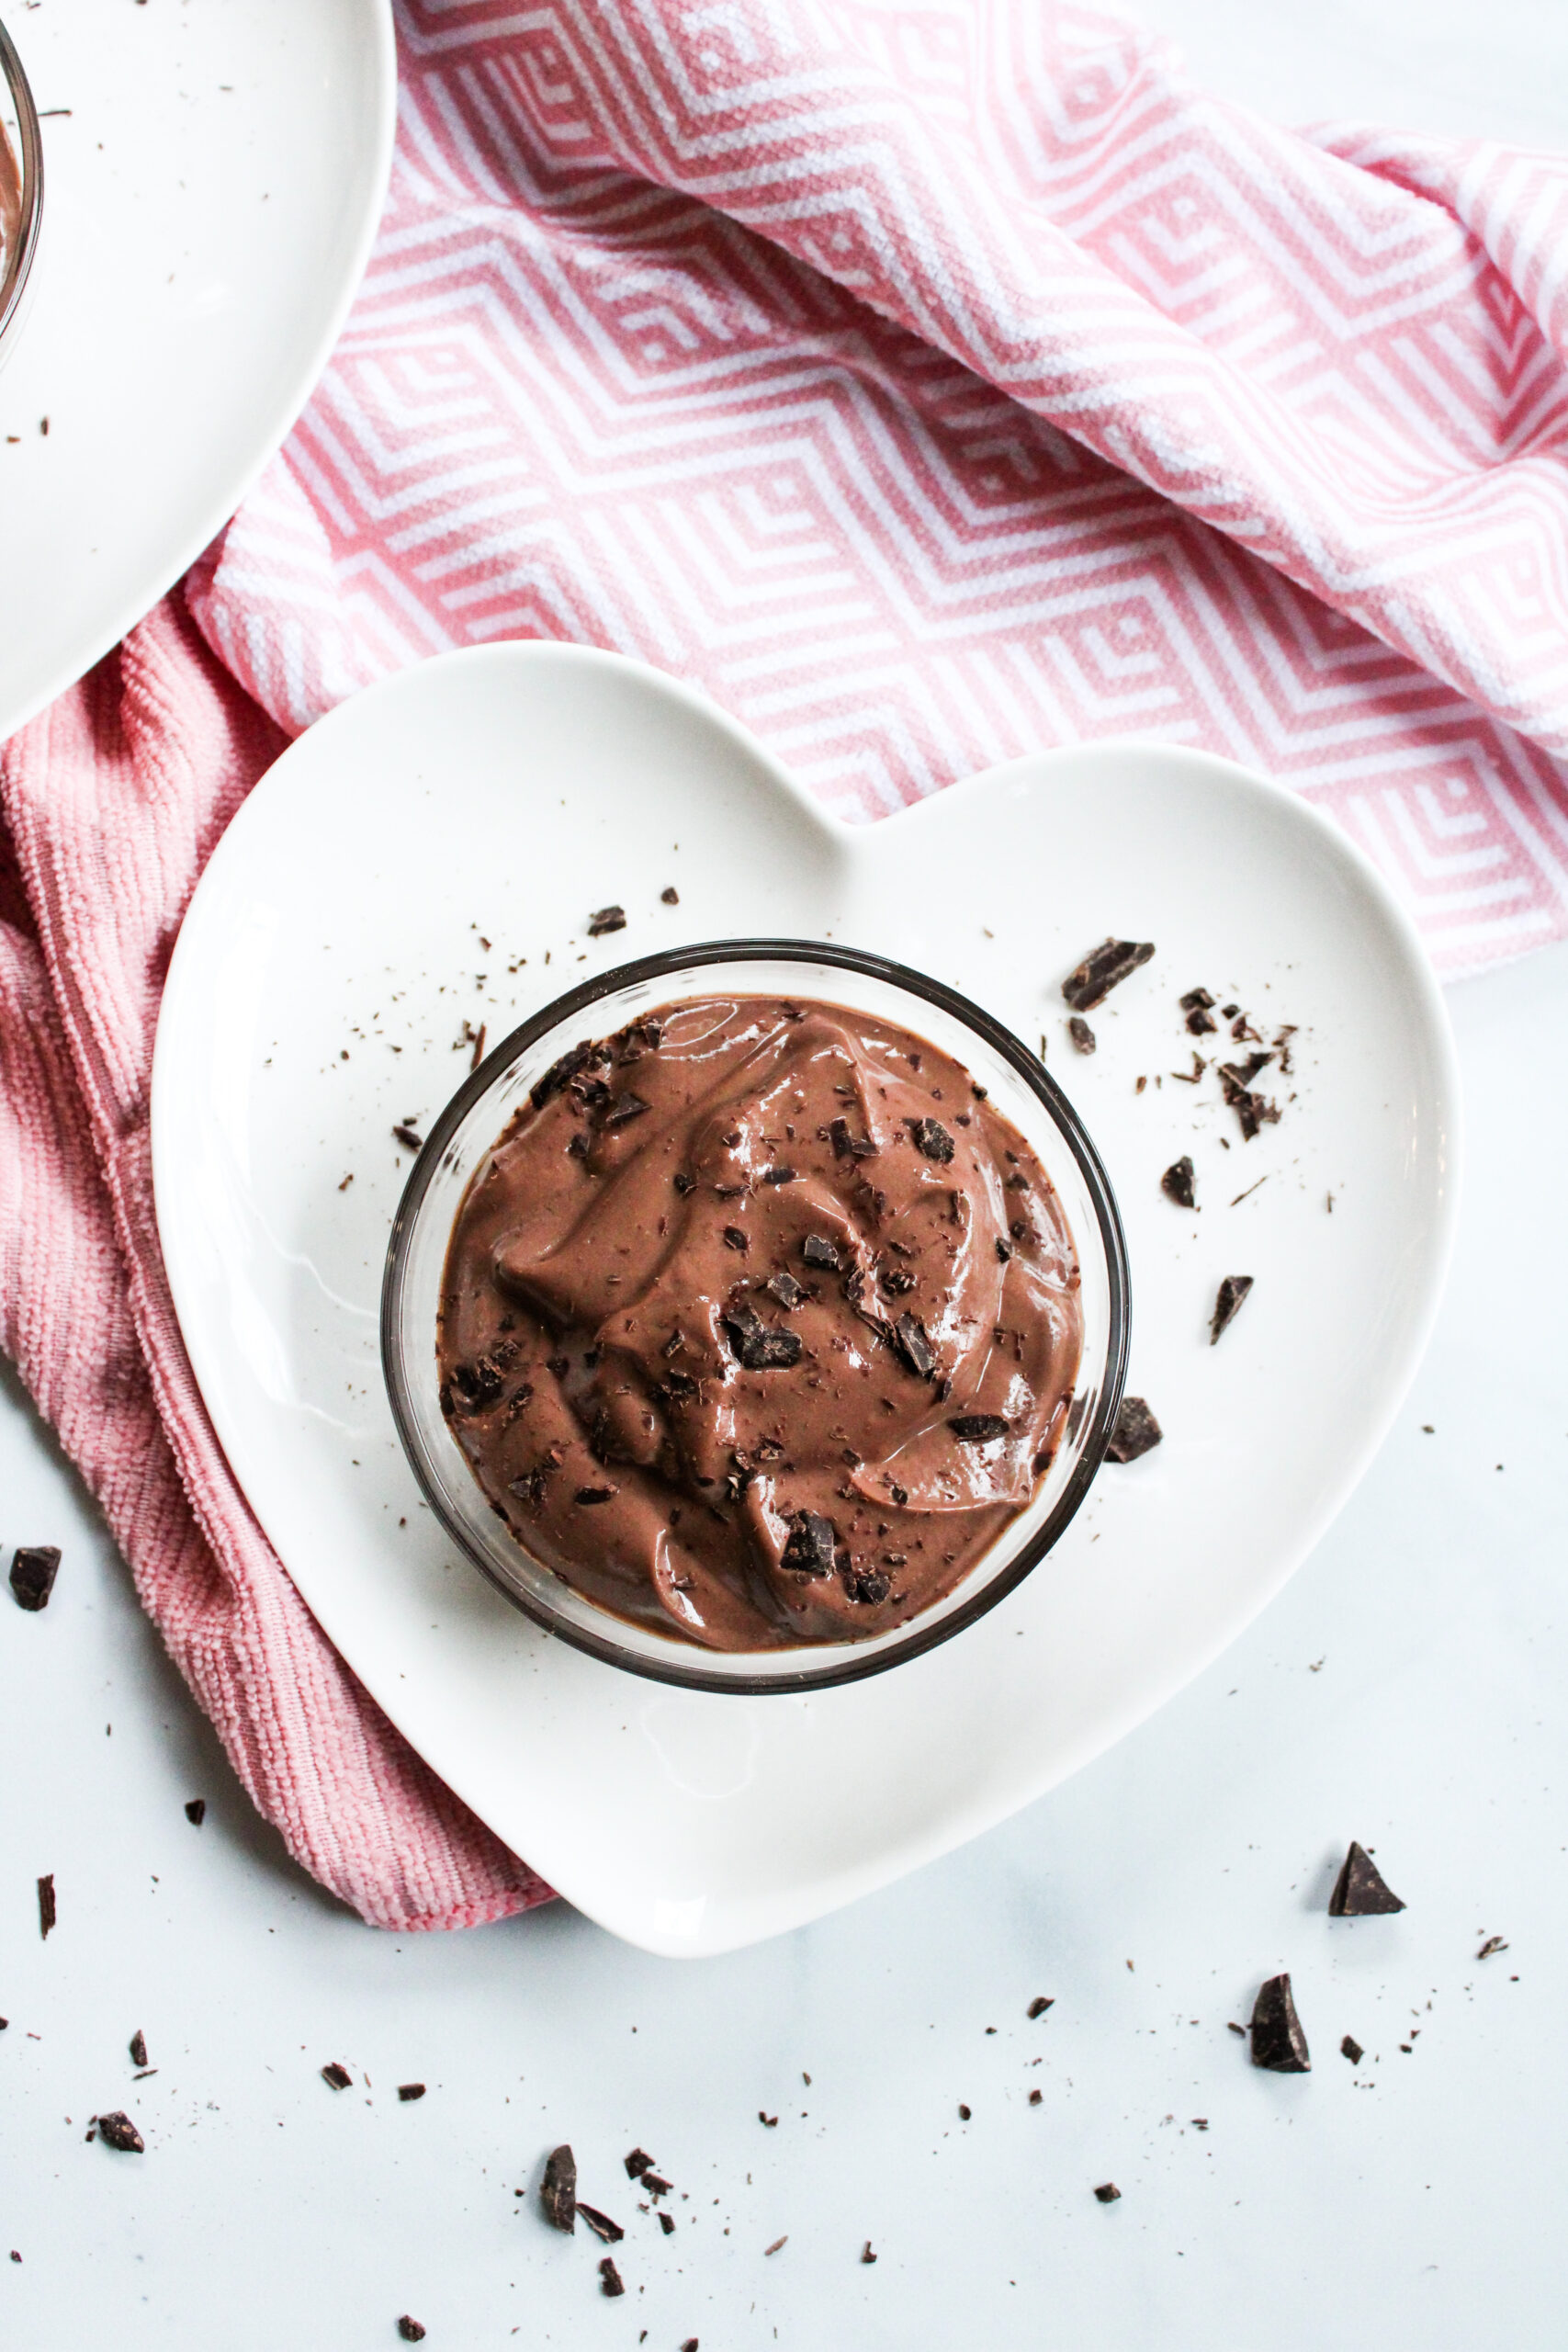 vegan chocolate mousse in a small glass bowl on top of white heart-shaped plates with a pink towel in the background